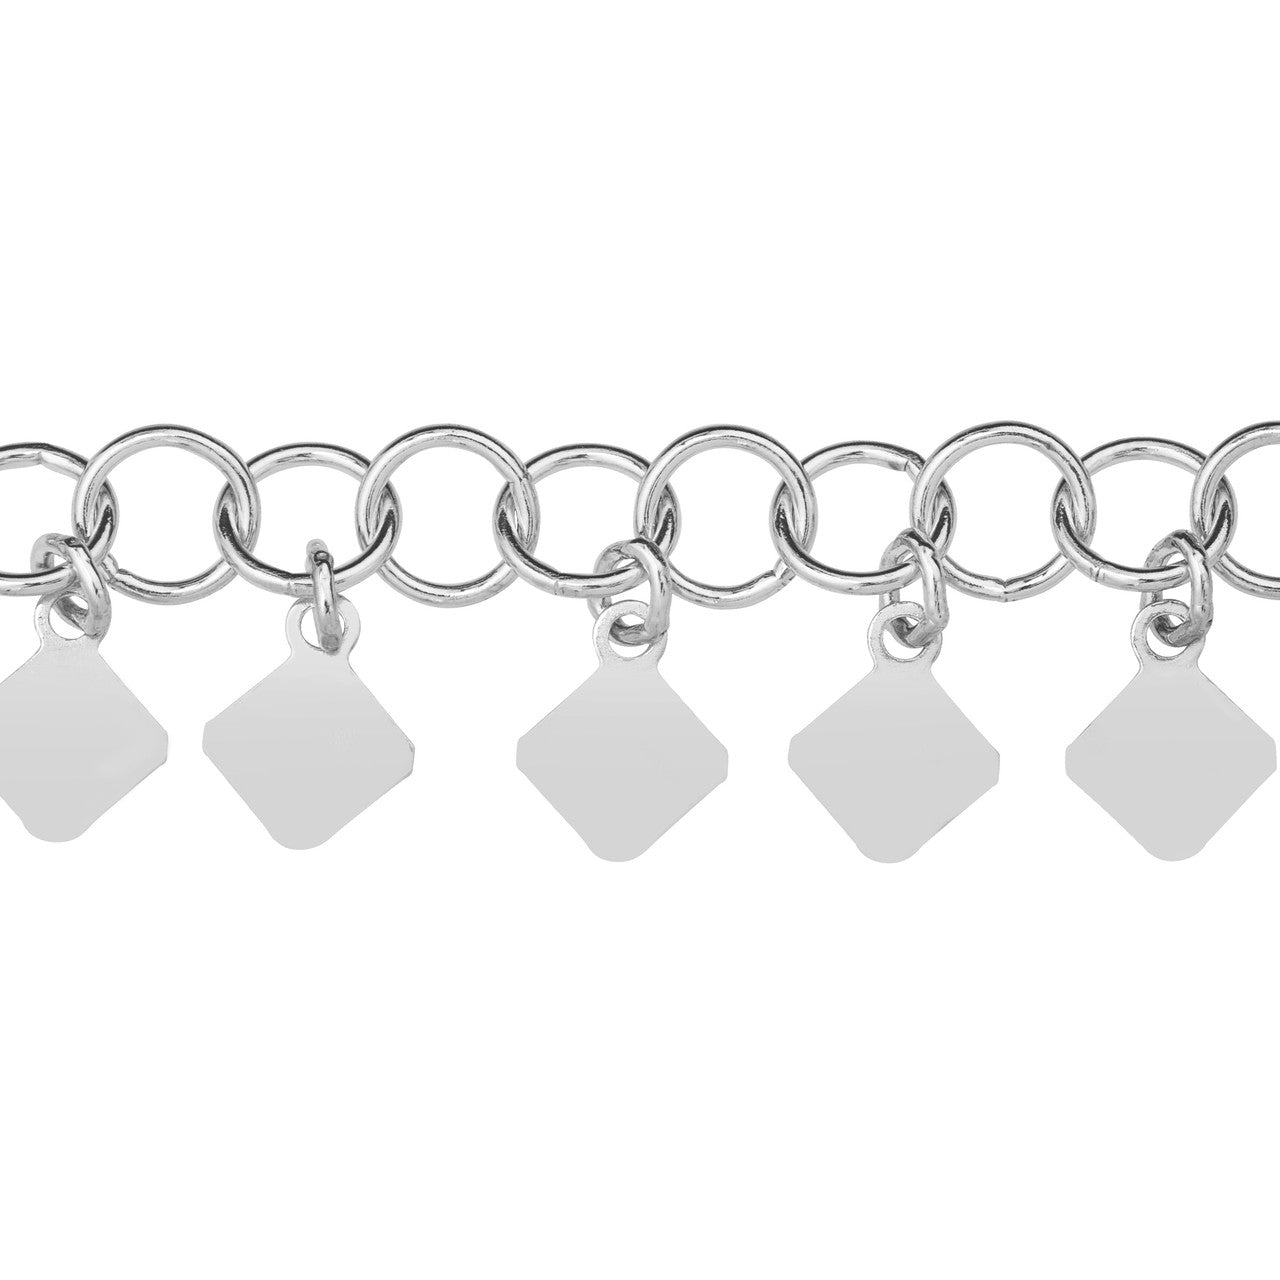 Sterling Silver Round Link Hanging Rhombus Anklet